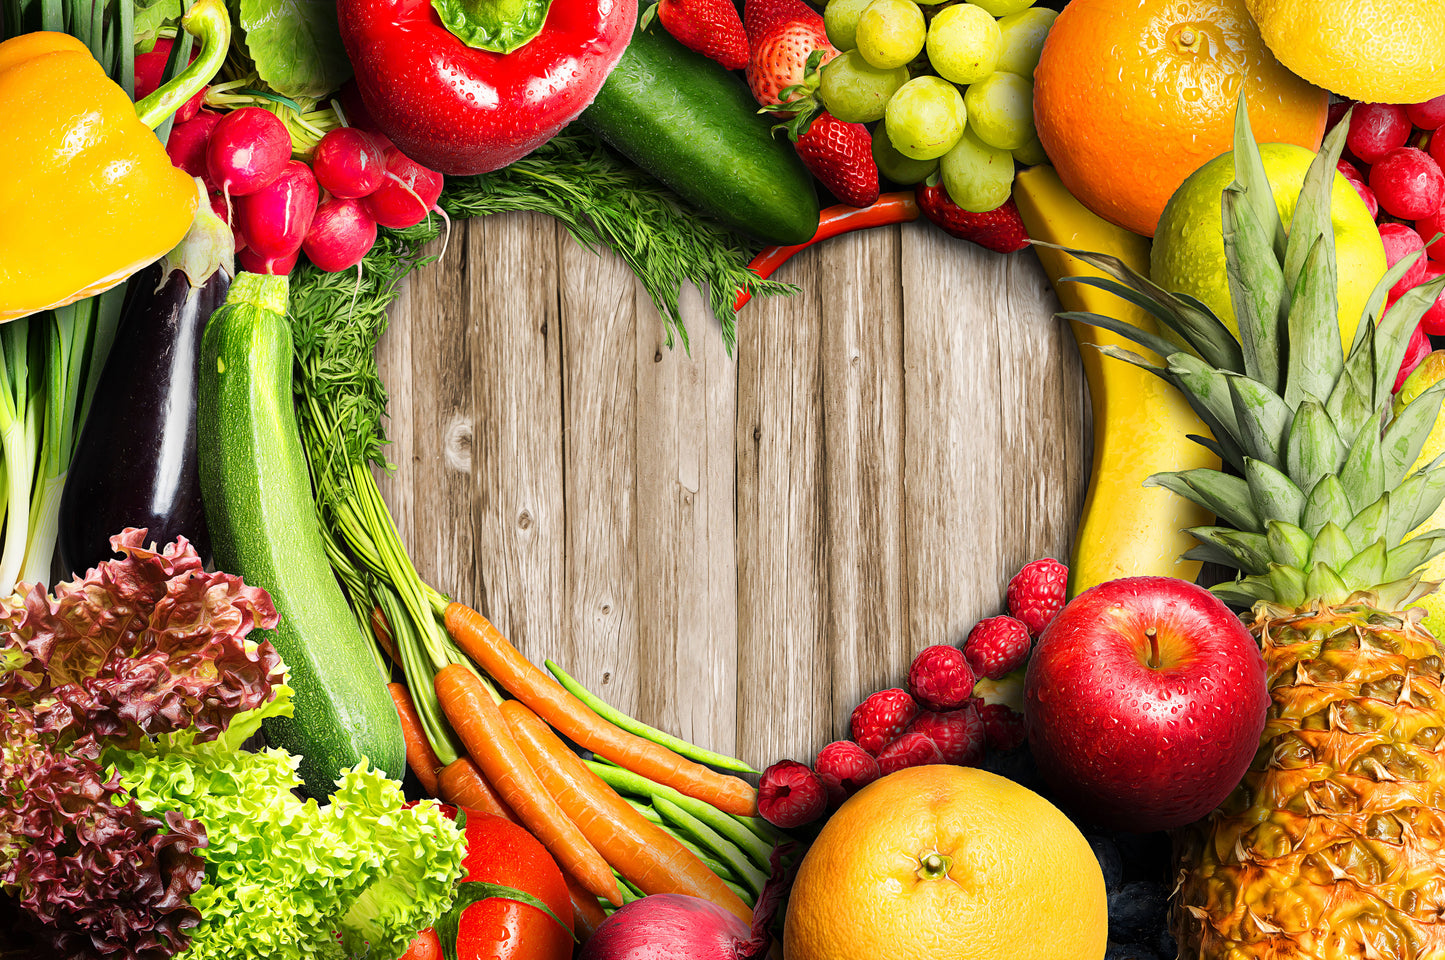 Prevent and Reverse Heart Disease with a Plant-Based Diet